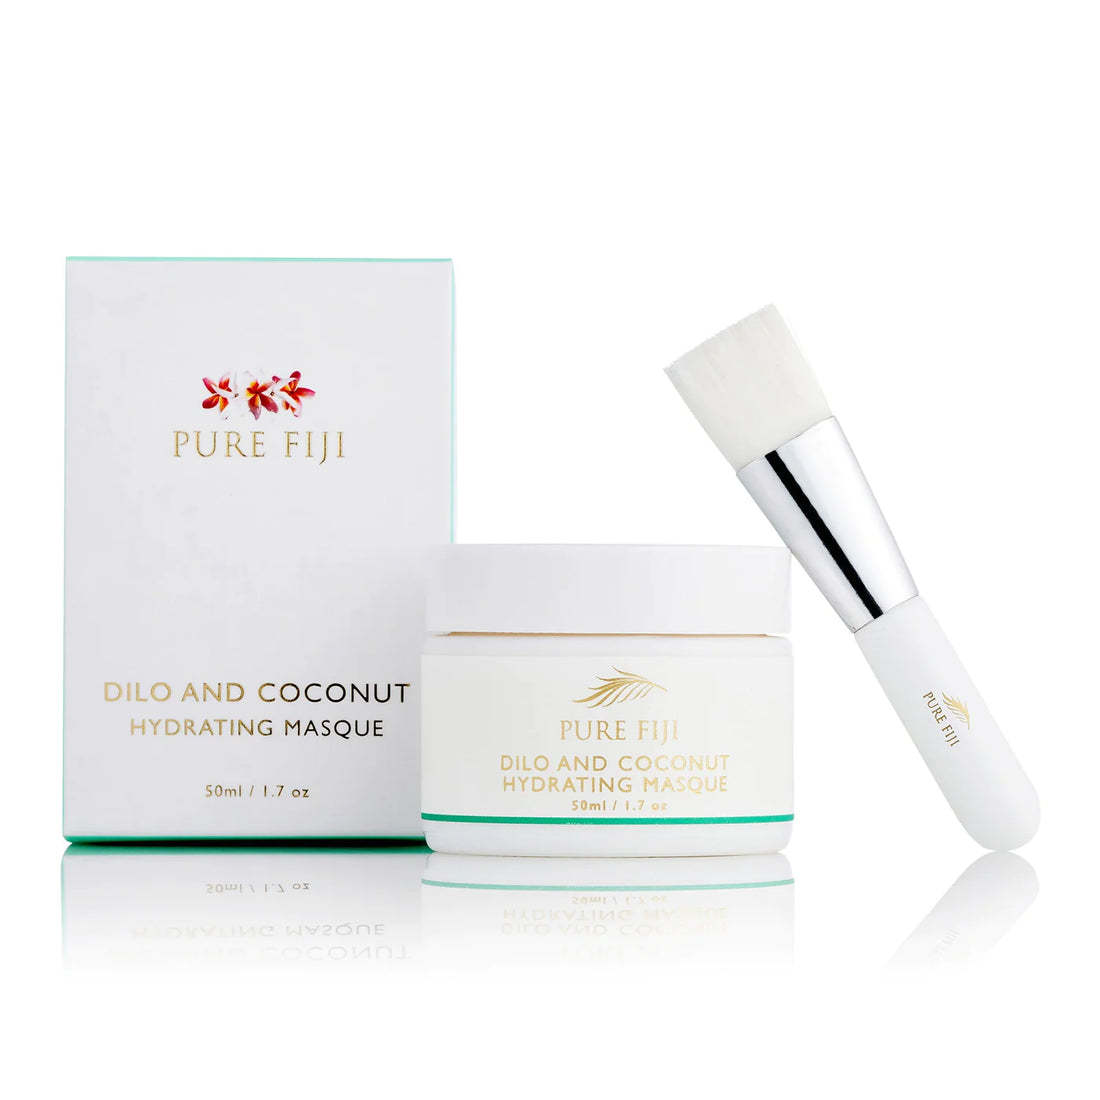 Pure Fiji Dilo and Coconut Hydrating Masque